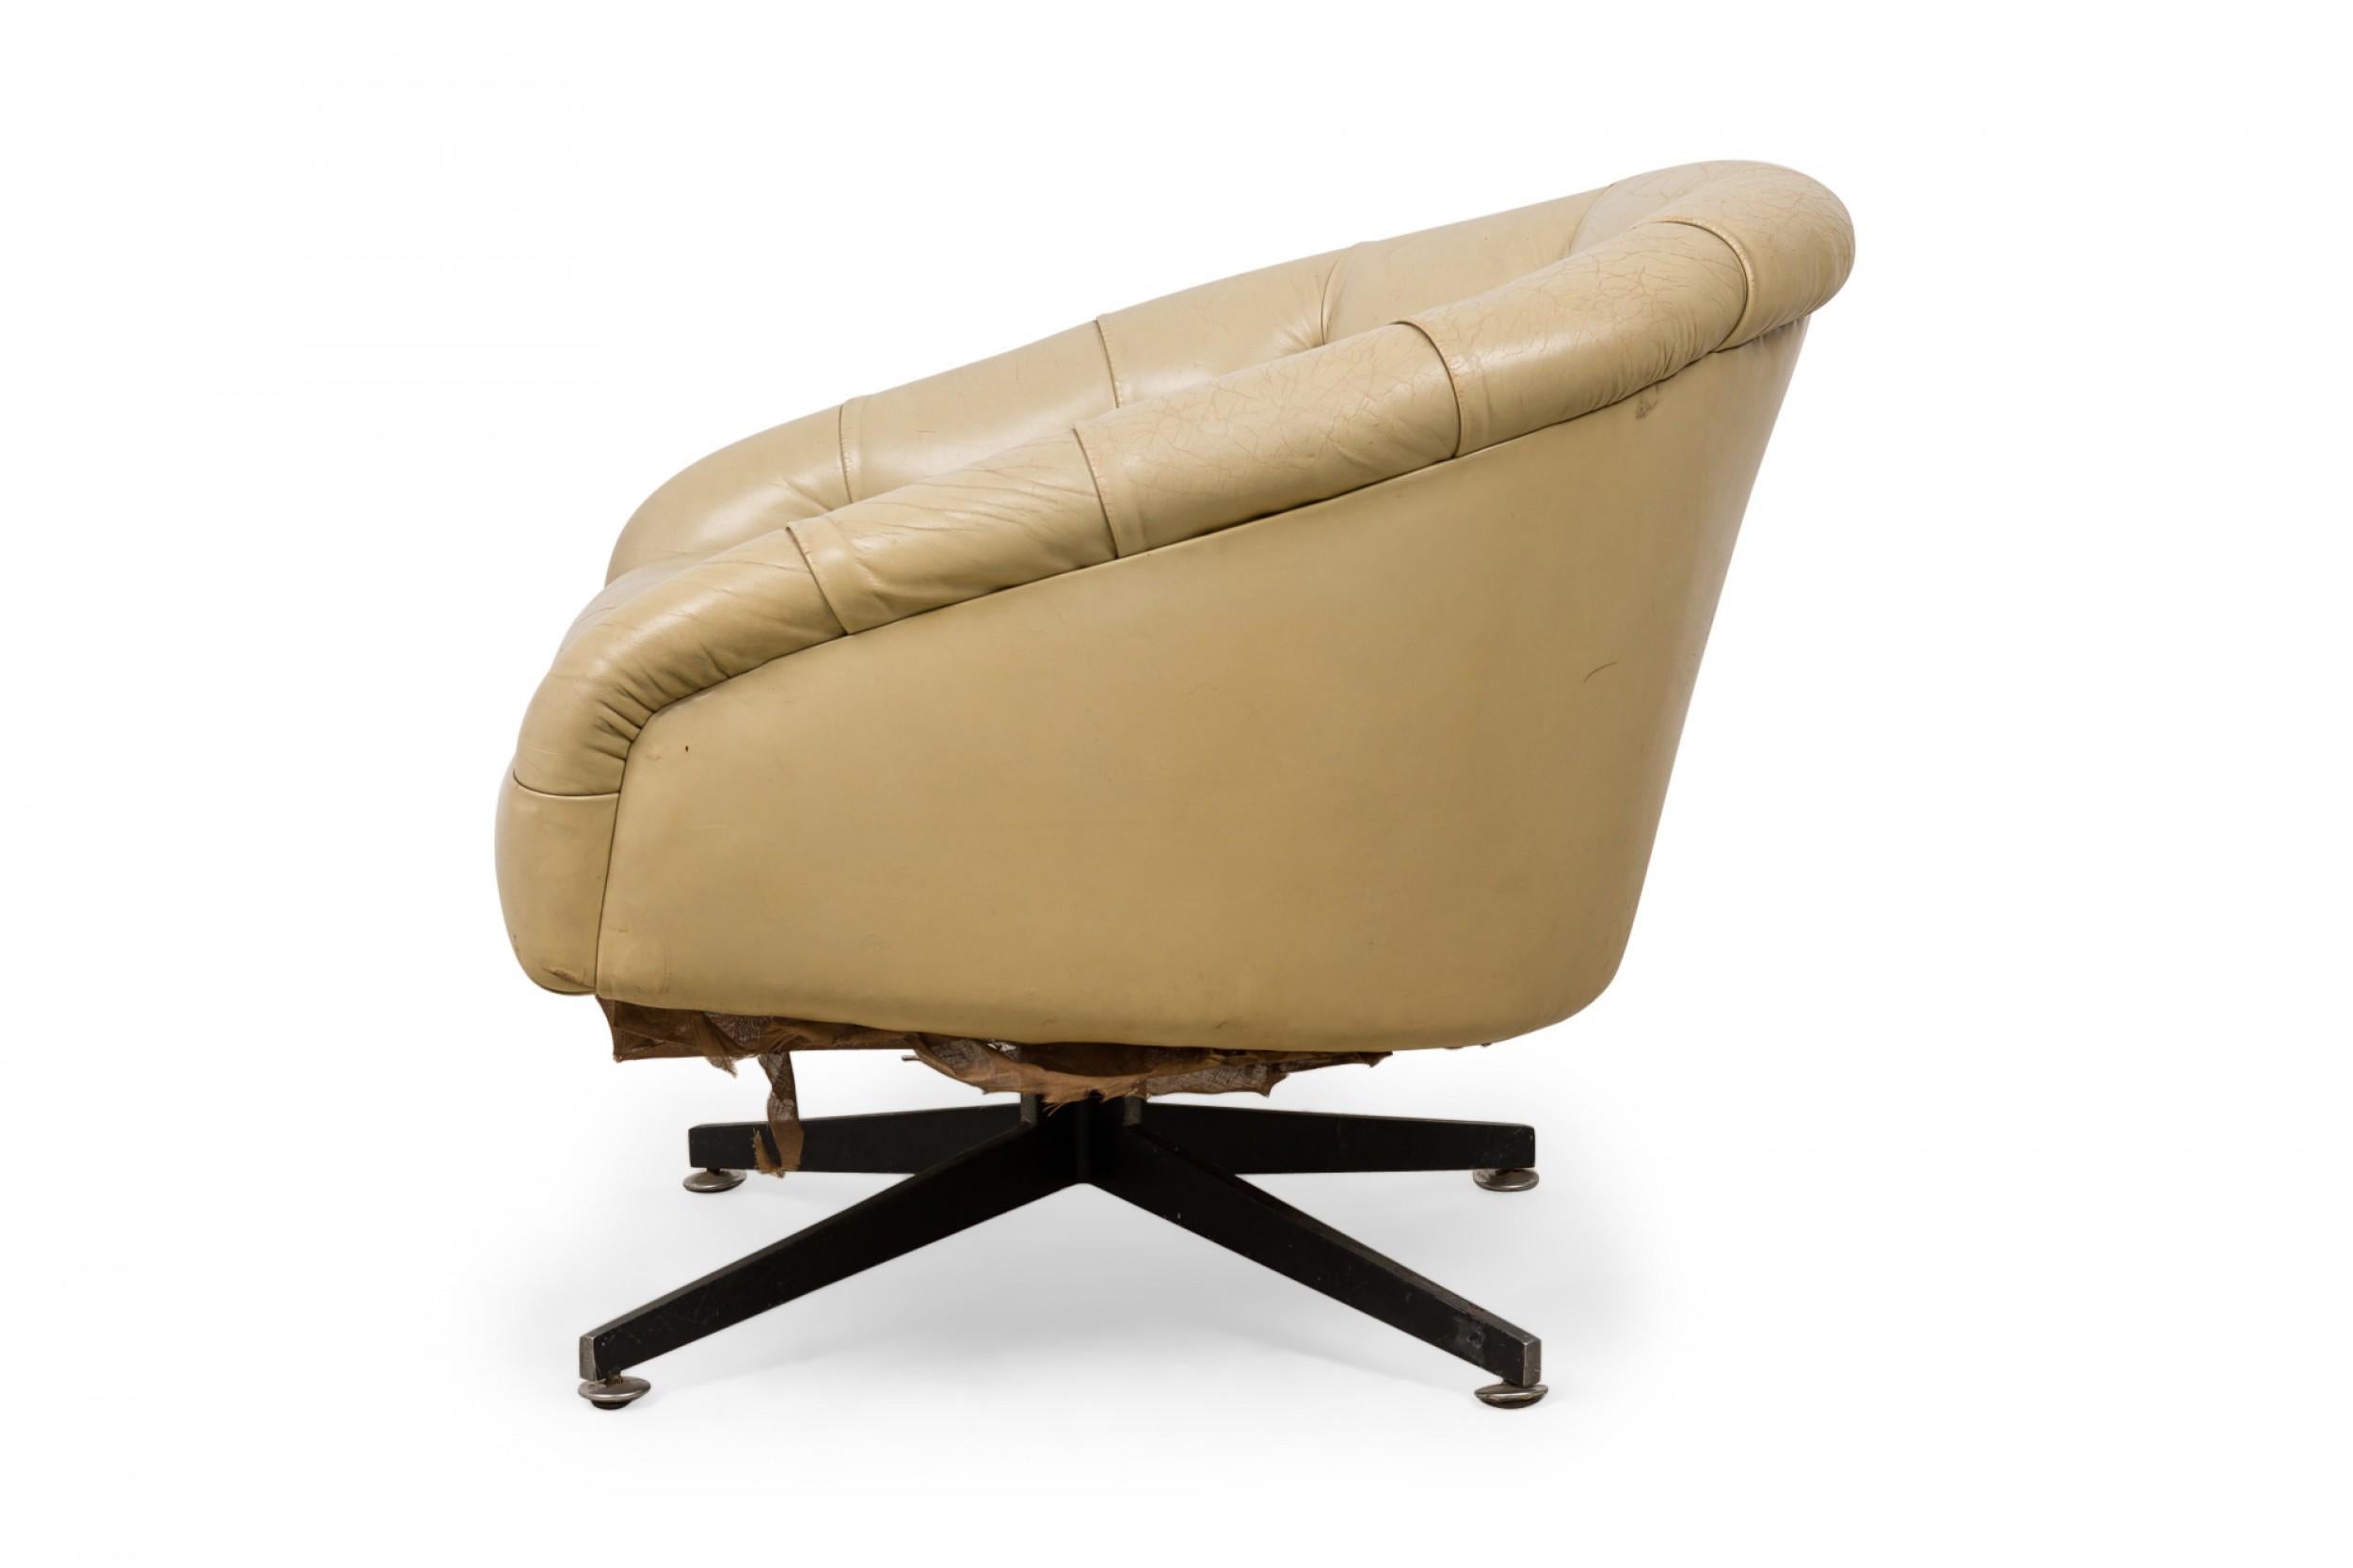 Mid-Century Modern Ward Bennett Chrome and Beige Tufted Leather Swivel Tub Lounge / Armchair For Sale